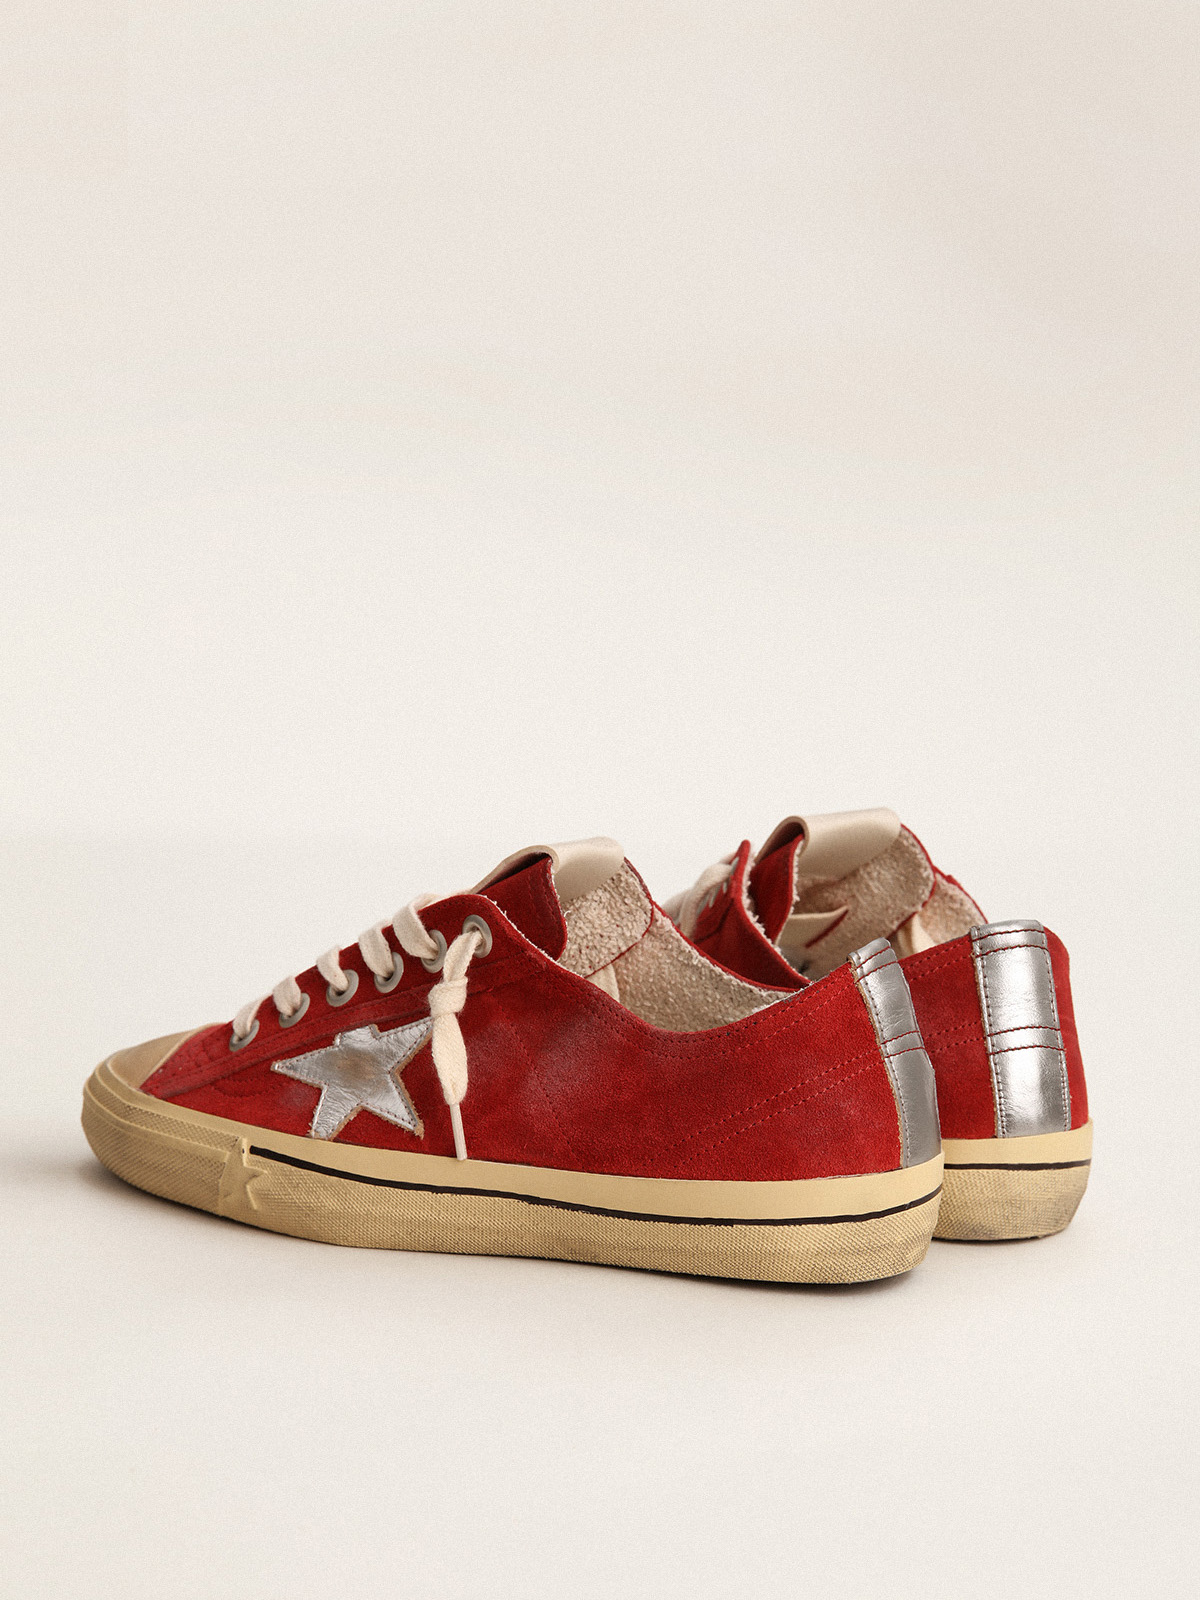 Men's V-Star LTD in dark red suede with silver star and heel tab